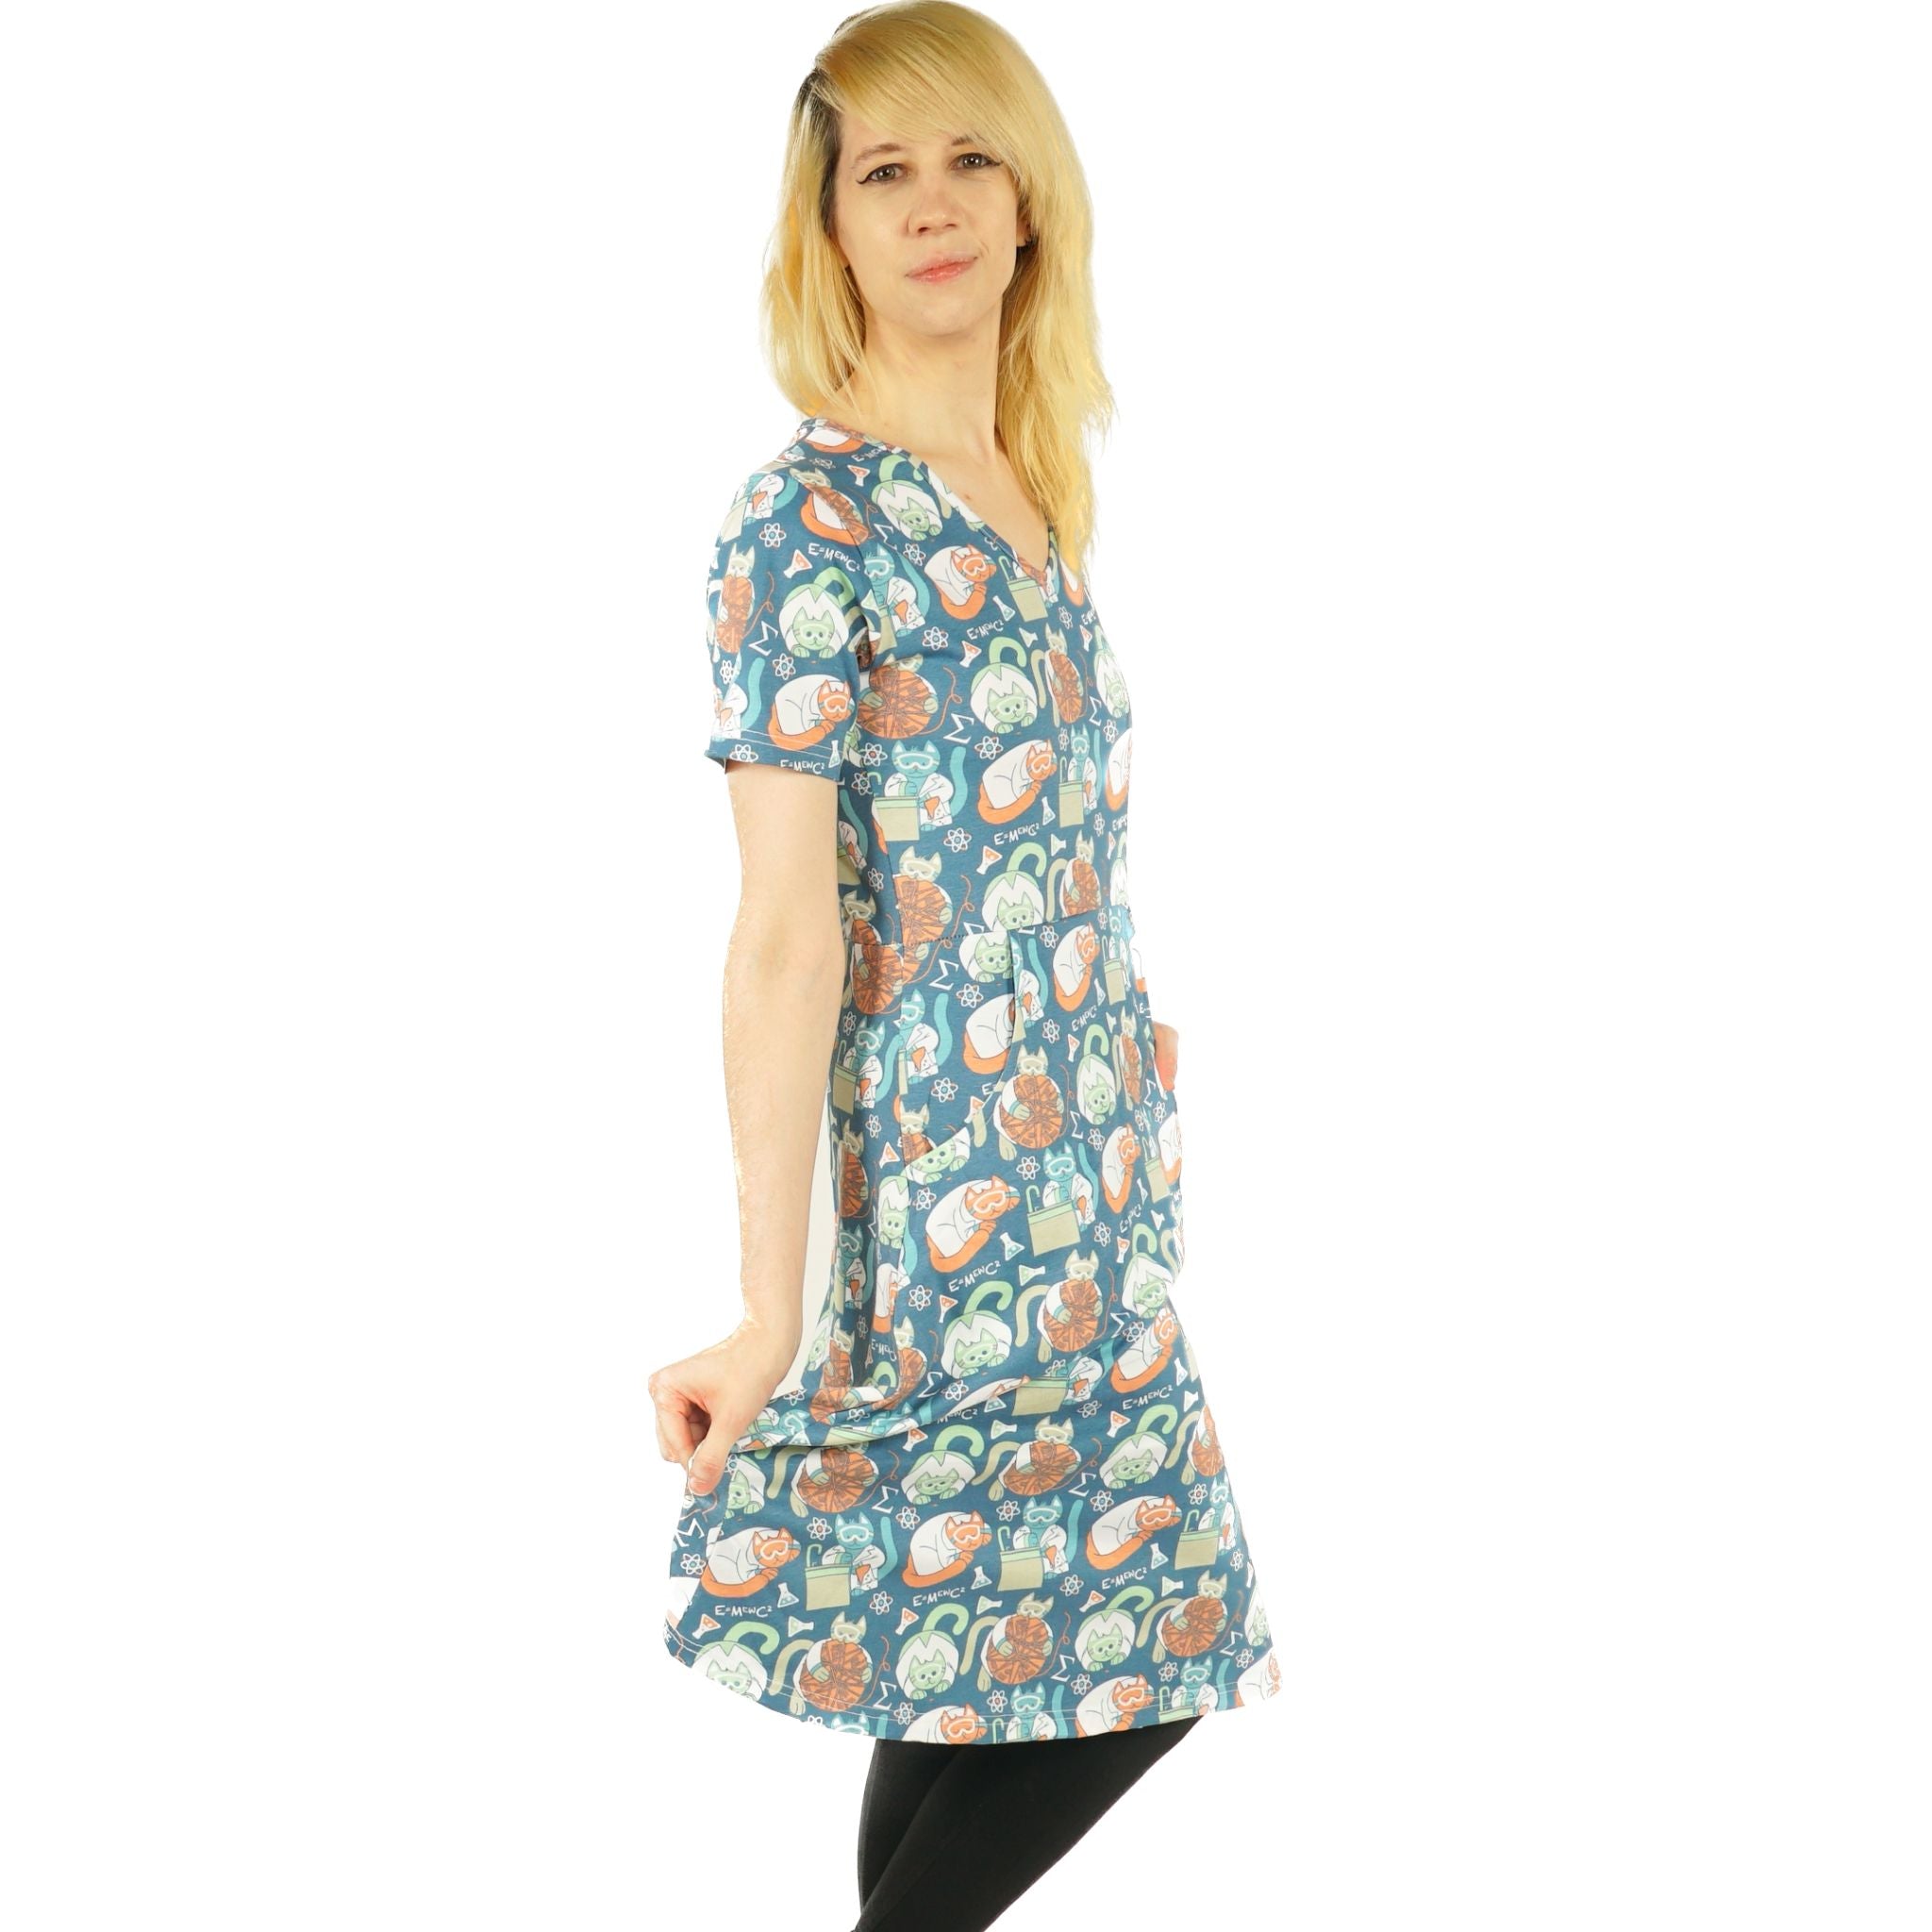 Science Cats A-Line Dress (With Waist Seam)